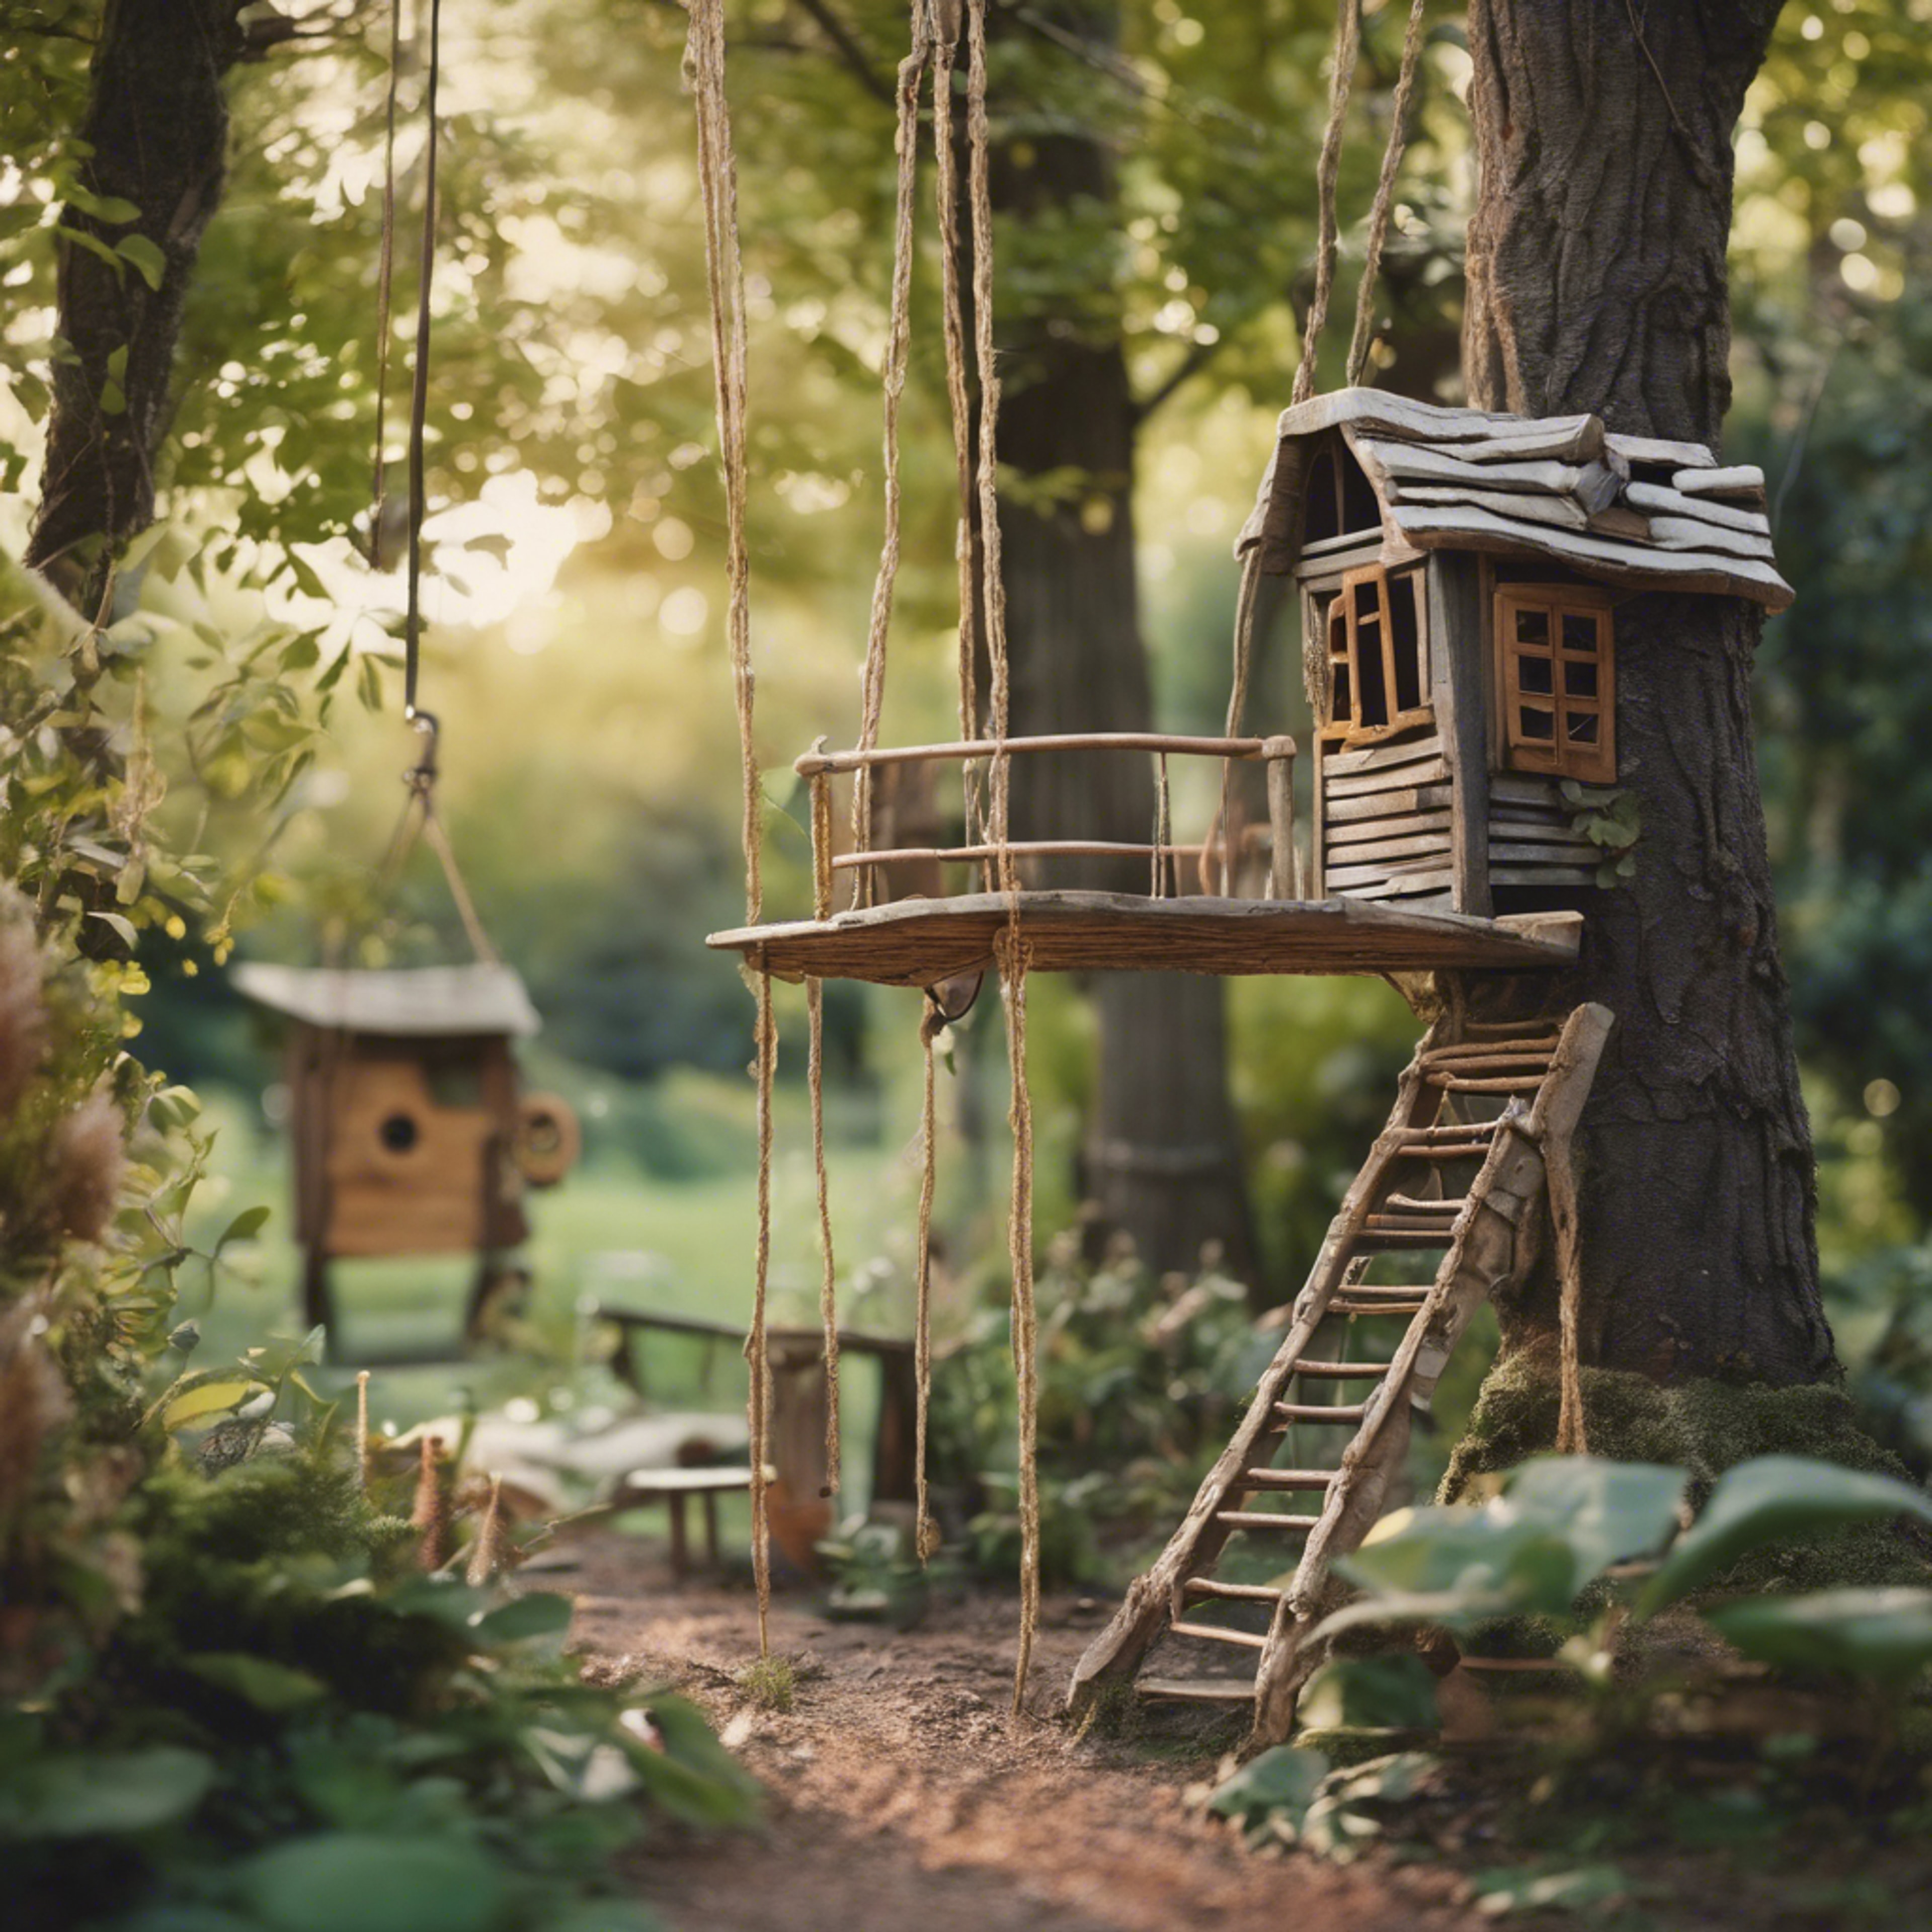 A nostalgic children’s garden filled with hidden treasures, tire swings, and treehouses built amidst towering trees. Tapet[4077f42451f34ca69b37]